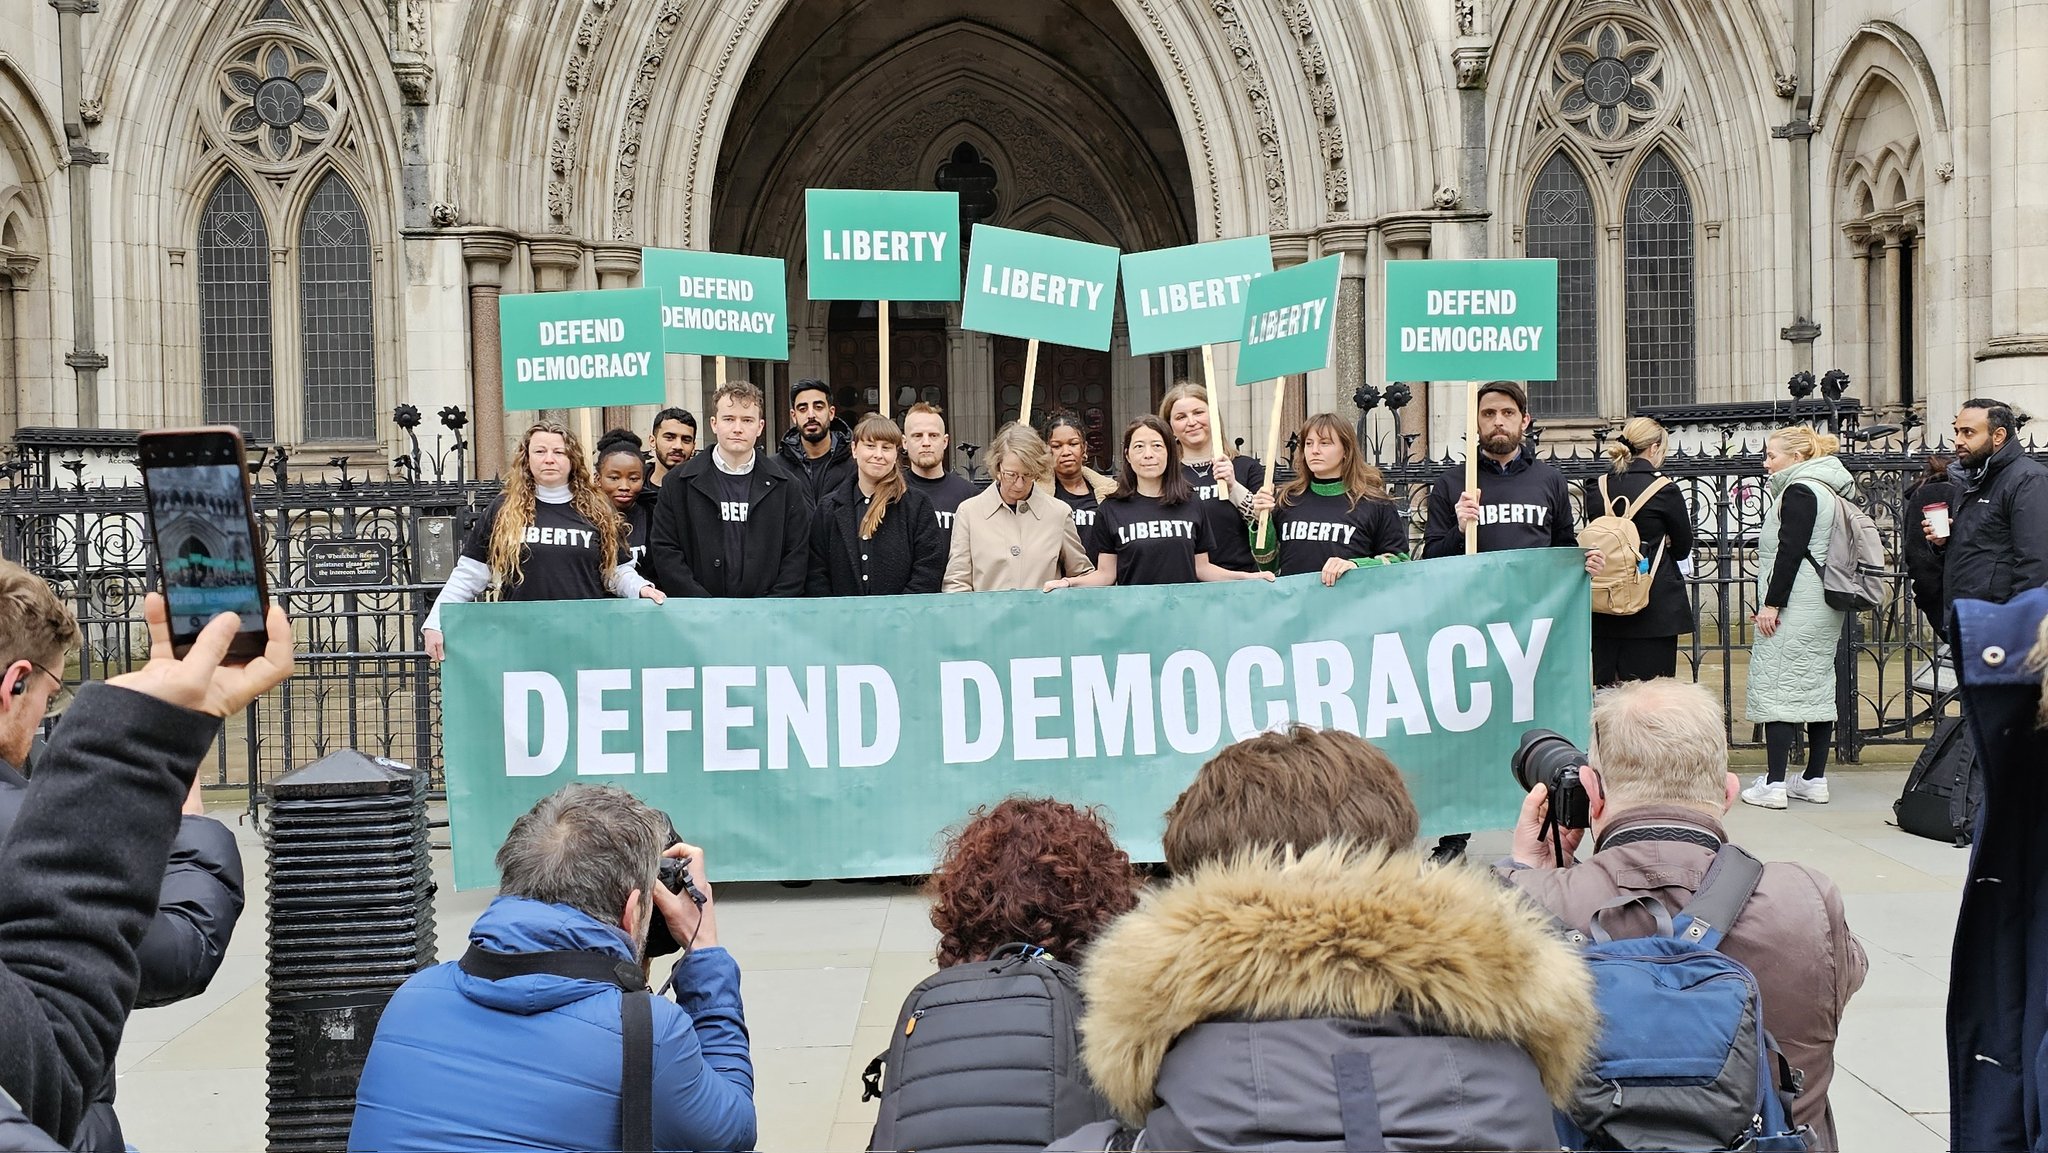 Liberty lawyers and staff outside the Royal Courts of Justice holding a banner that says "DEFEND DEMOCRACY"